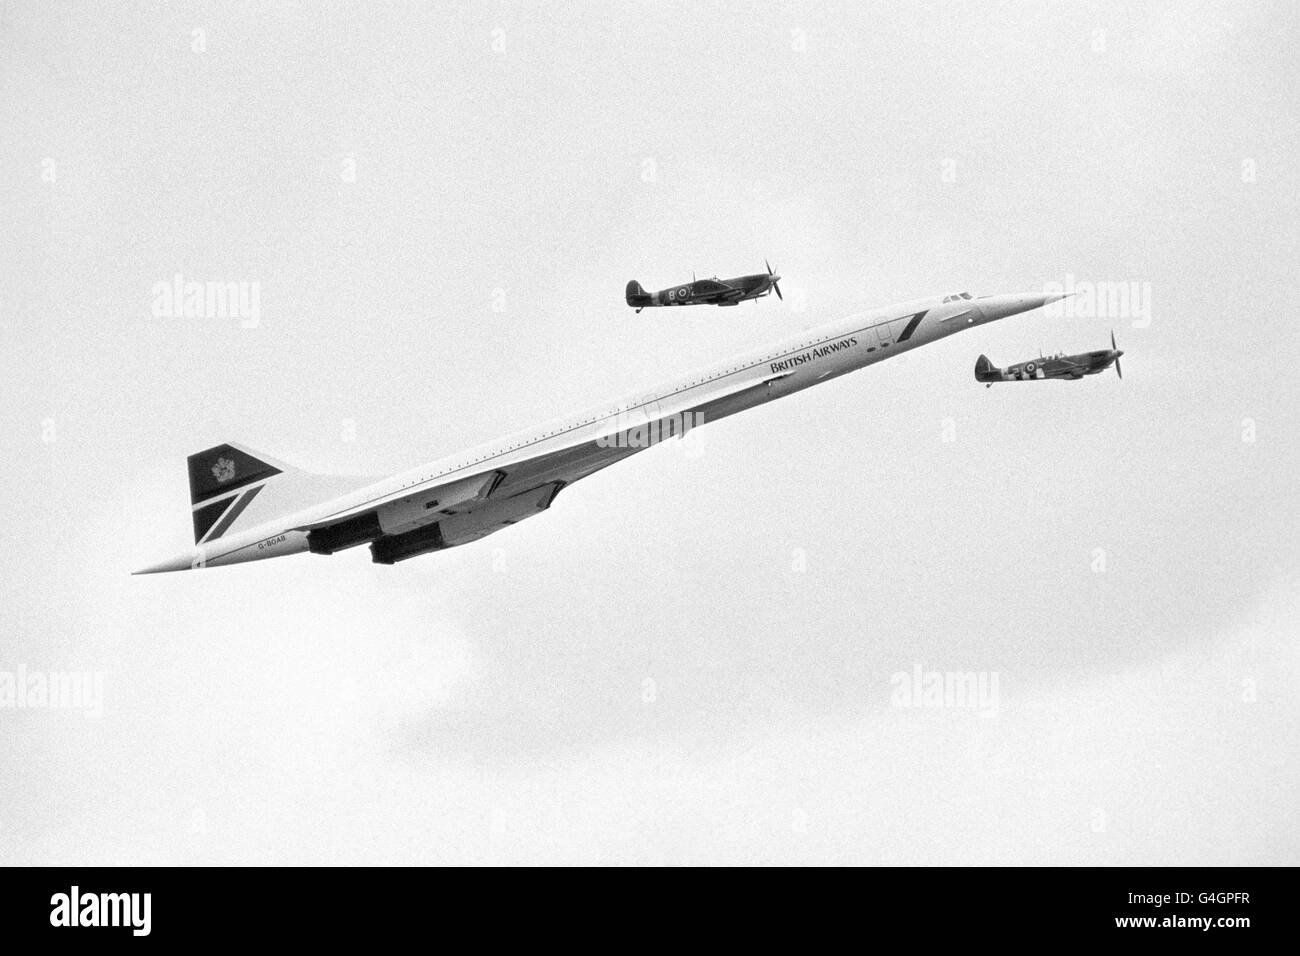 A British Airways Concorde is shadowed by two Second World War Spitfires as it arrives to make a pass over Biggin Hill during the Air Show Stock Photo